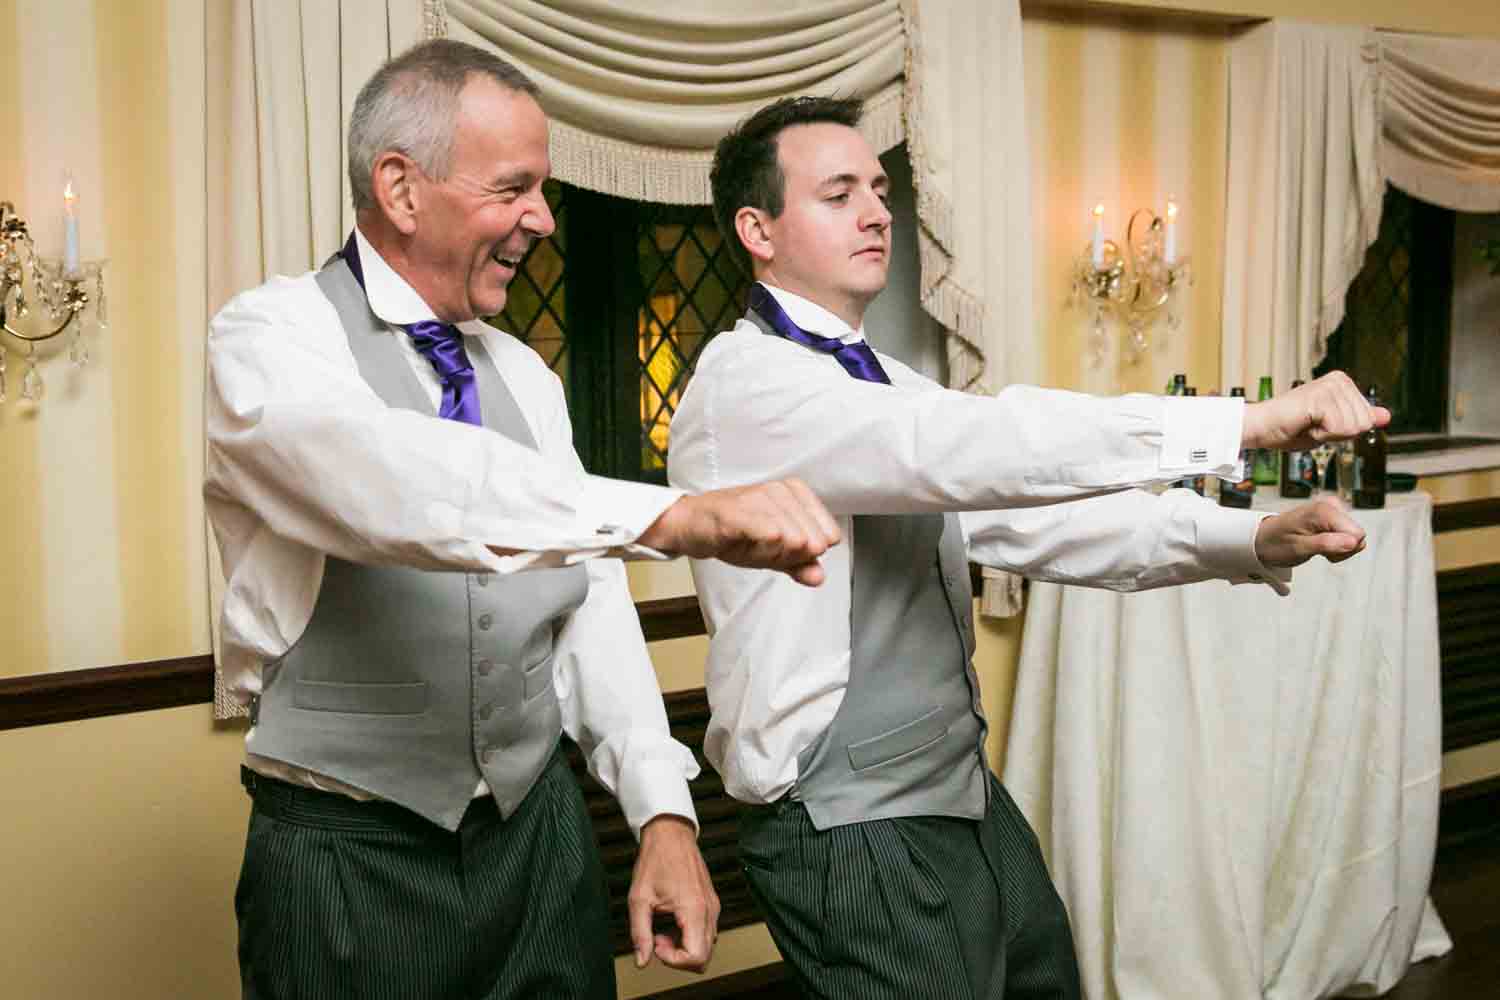 Two guests dancing at wedding reception with arms outstretched